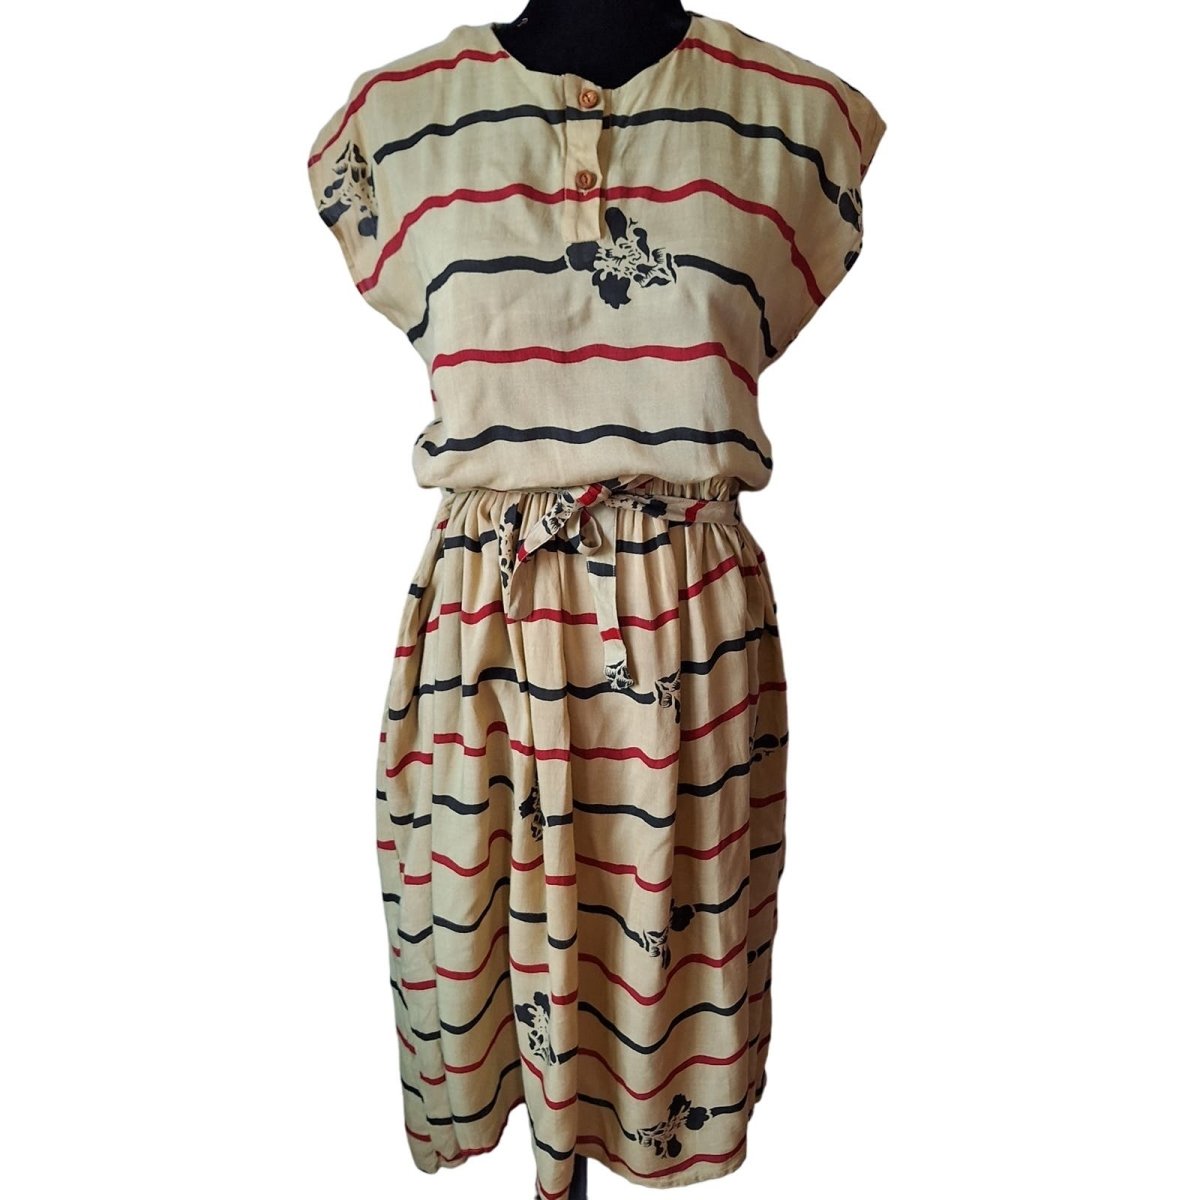 L'affaire Rayon Tan Floral Striped Cap Sleeve Blouson Midi Dress Women Size S/M AS IS - themallvintage The Mall Vintage 1980s 1990s Dresses